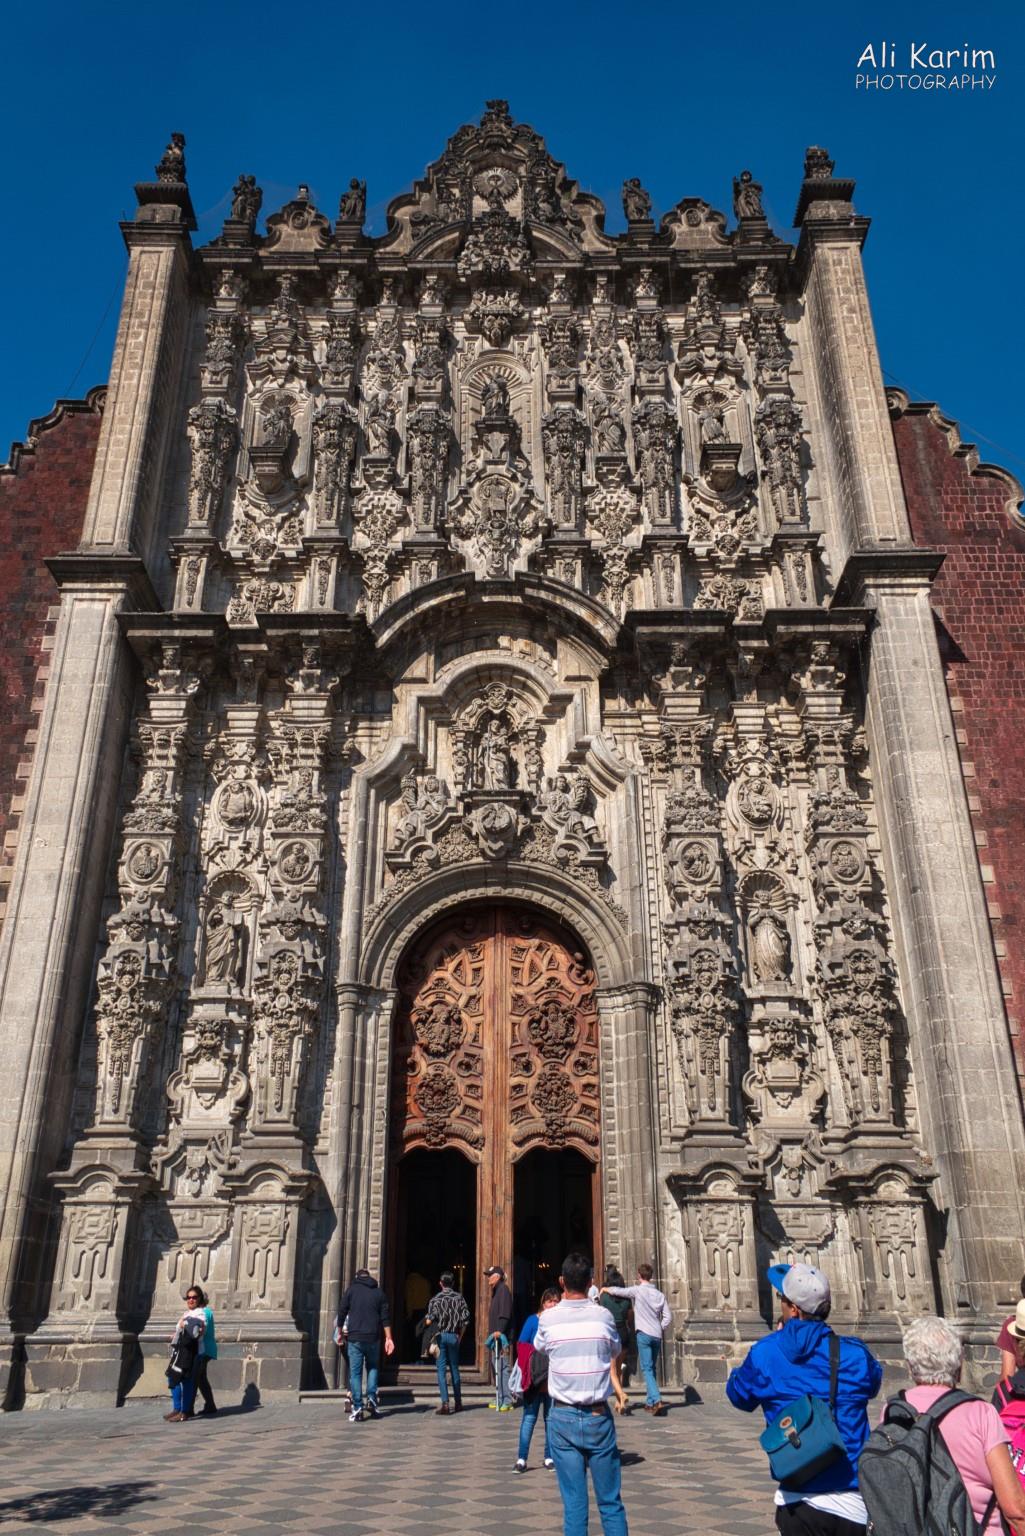 Mexico City, Mexico, Dec 2019, Intricate carvings on the Metropolitan Cathedral entrance